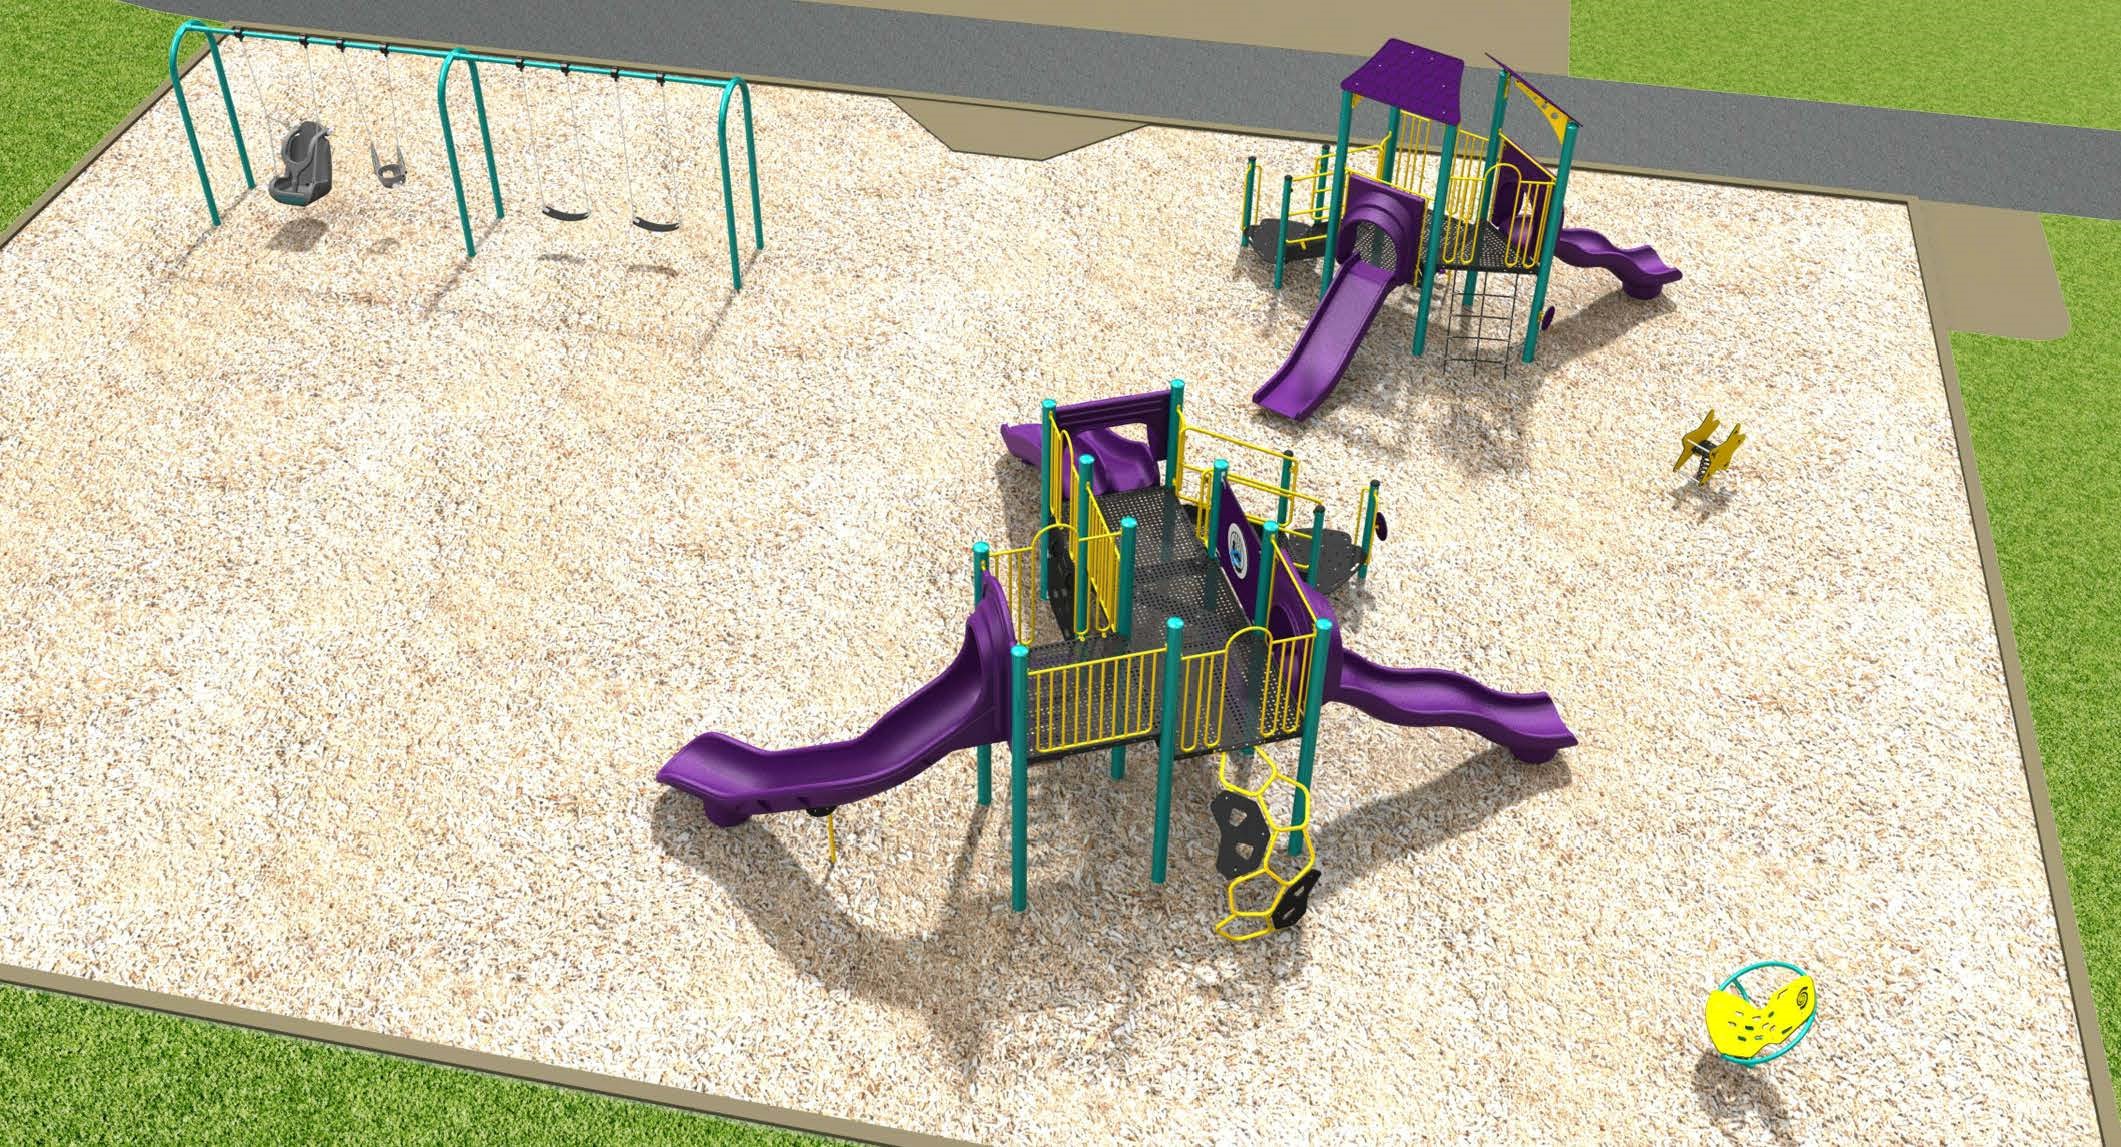 Aerial rendered view of Playground Design C for the St. Lucie Park Playground improvements looking from west to east. A new swingset with two belt swings, a toddler swing and one accessible swing next to a new junior play structure with a wavy slide and three climbing options. On the south side of the park is one senior play structure with one double slide, one wavy slide, one large curved slide and four climbing options. Primary colour for the equipment is purple.